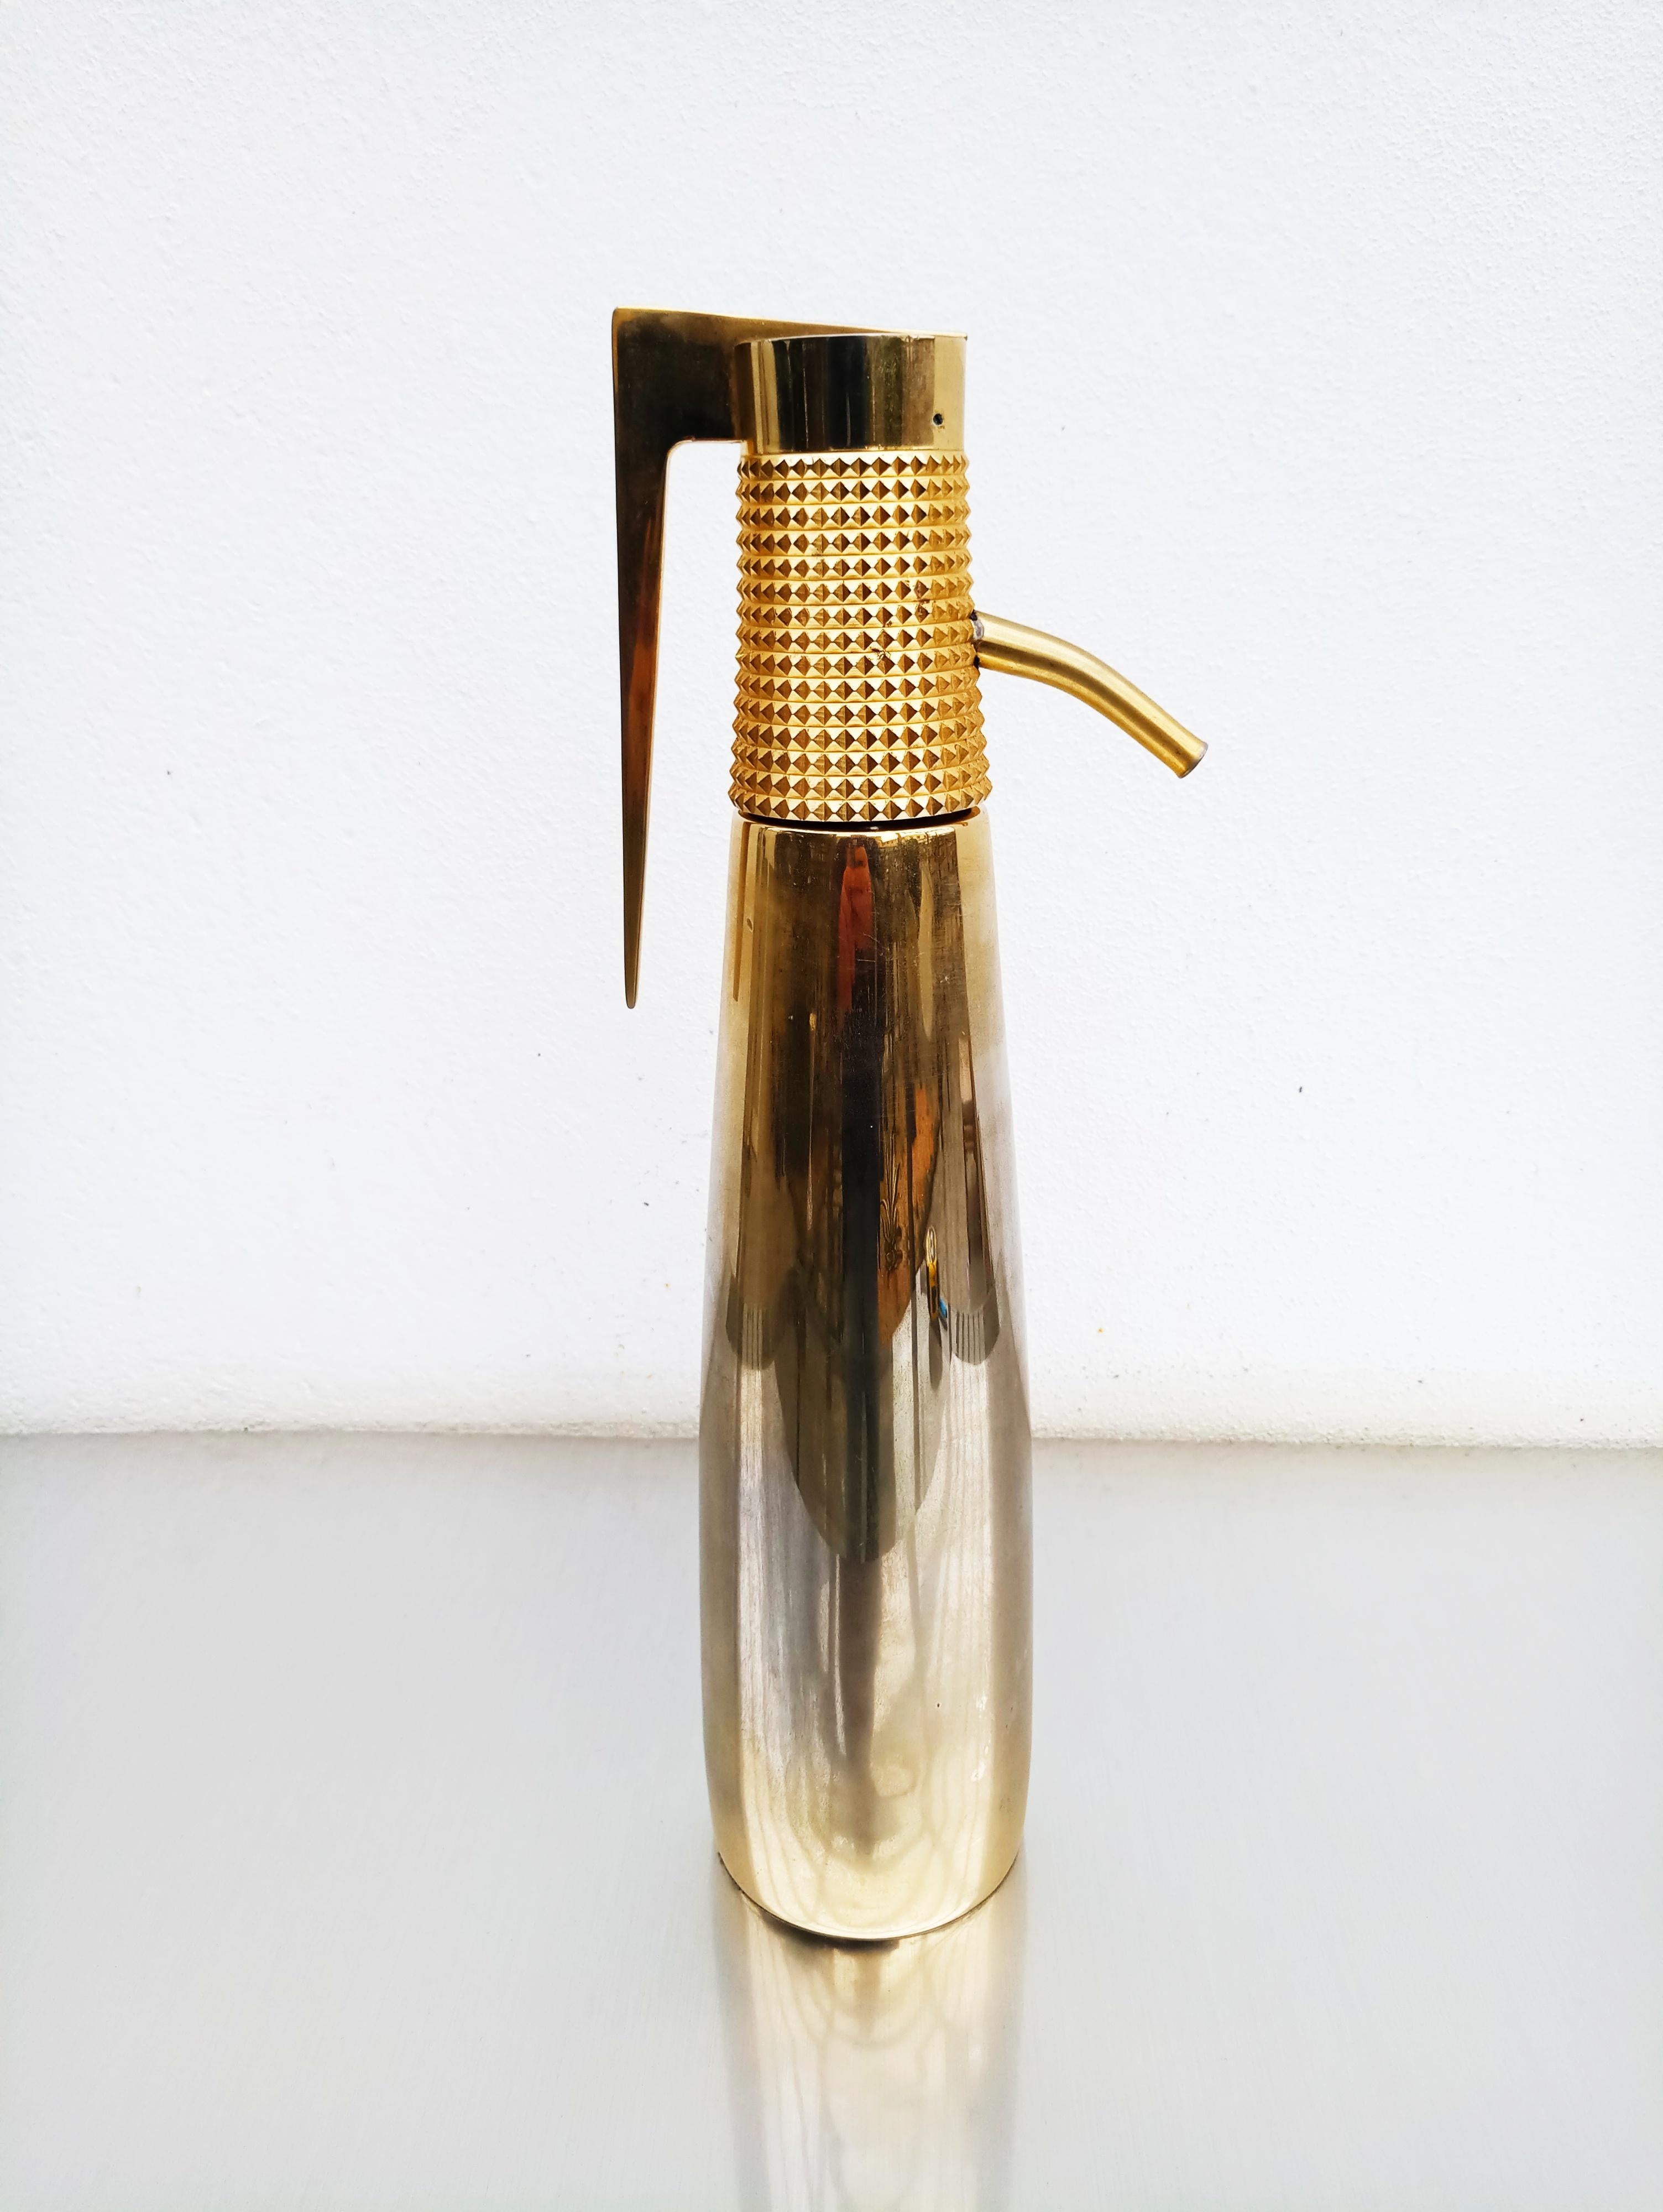 Beautiful and design 1960s French soda siphon seltzer water bottle.
In very good vintage condition.